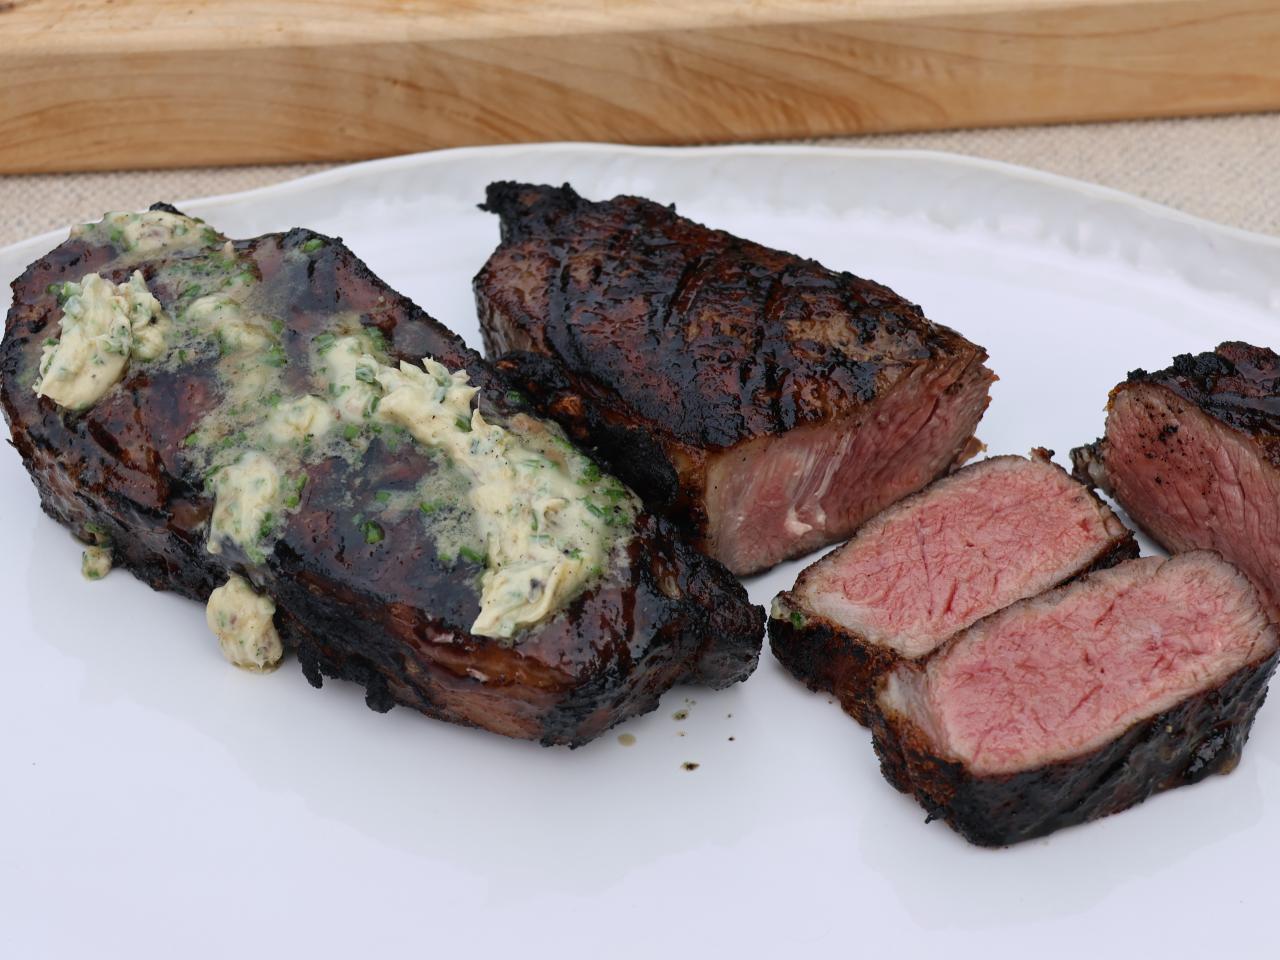 https://food.fnr.sndimg.com/content/dam/images/food/fullset/2023/5/09/ANIE407-michael-symon-grilled-strip-steak-with-anchovy-garlic-butter_s4x3.JPG.rend.hgtvcom.1280.960.suffix/1683666475760.jpeg